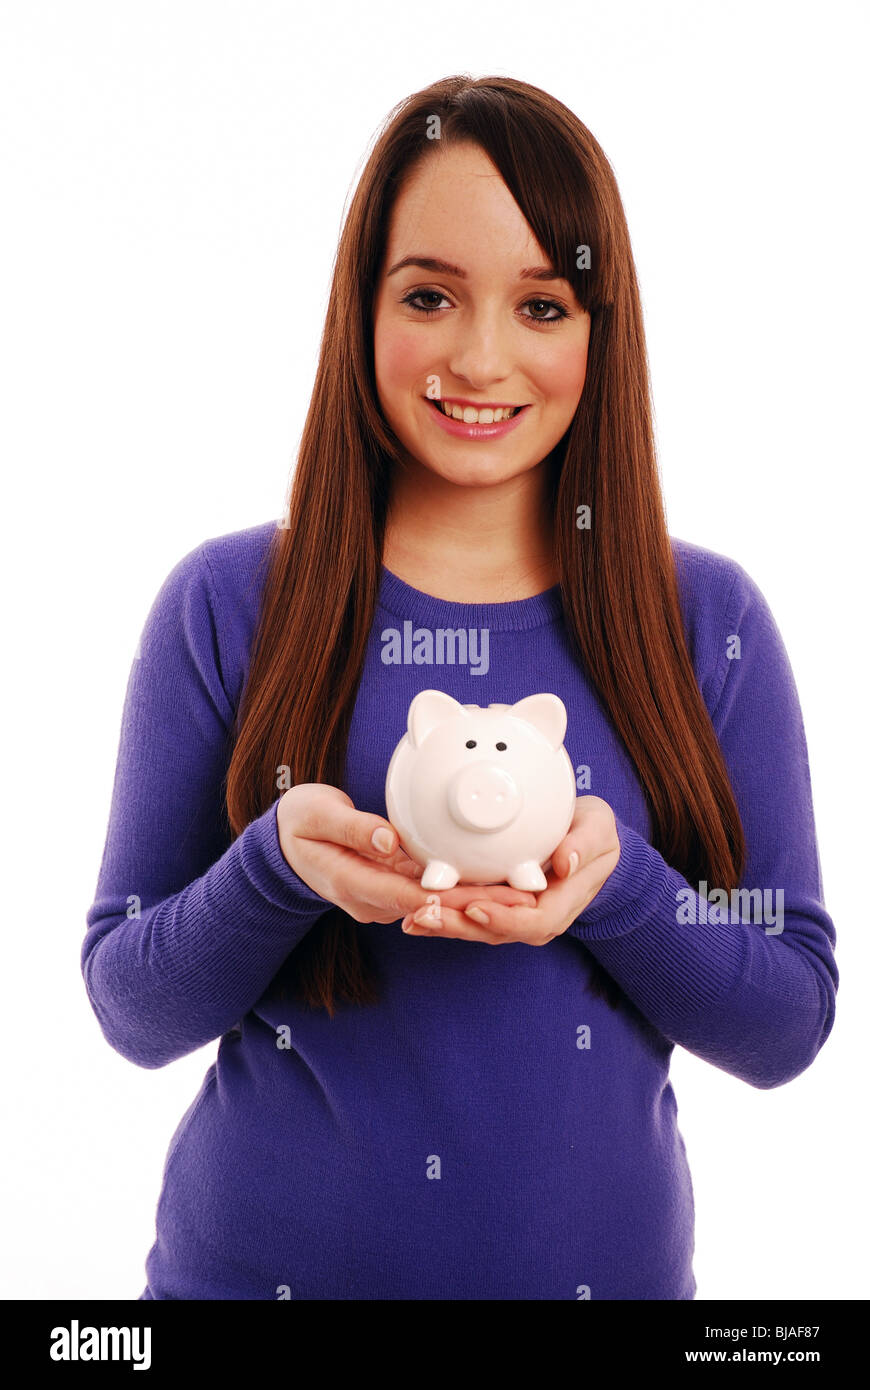 Young girl holding a piggy bank Stock Photo